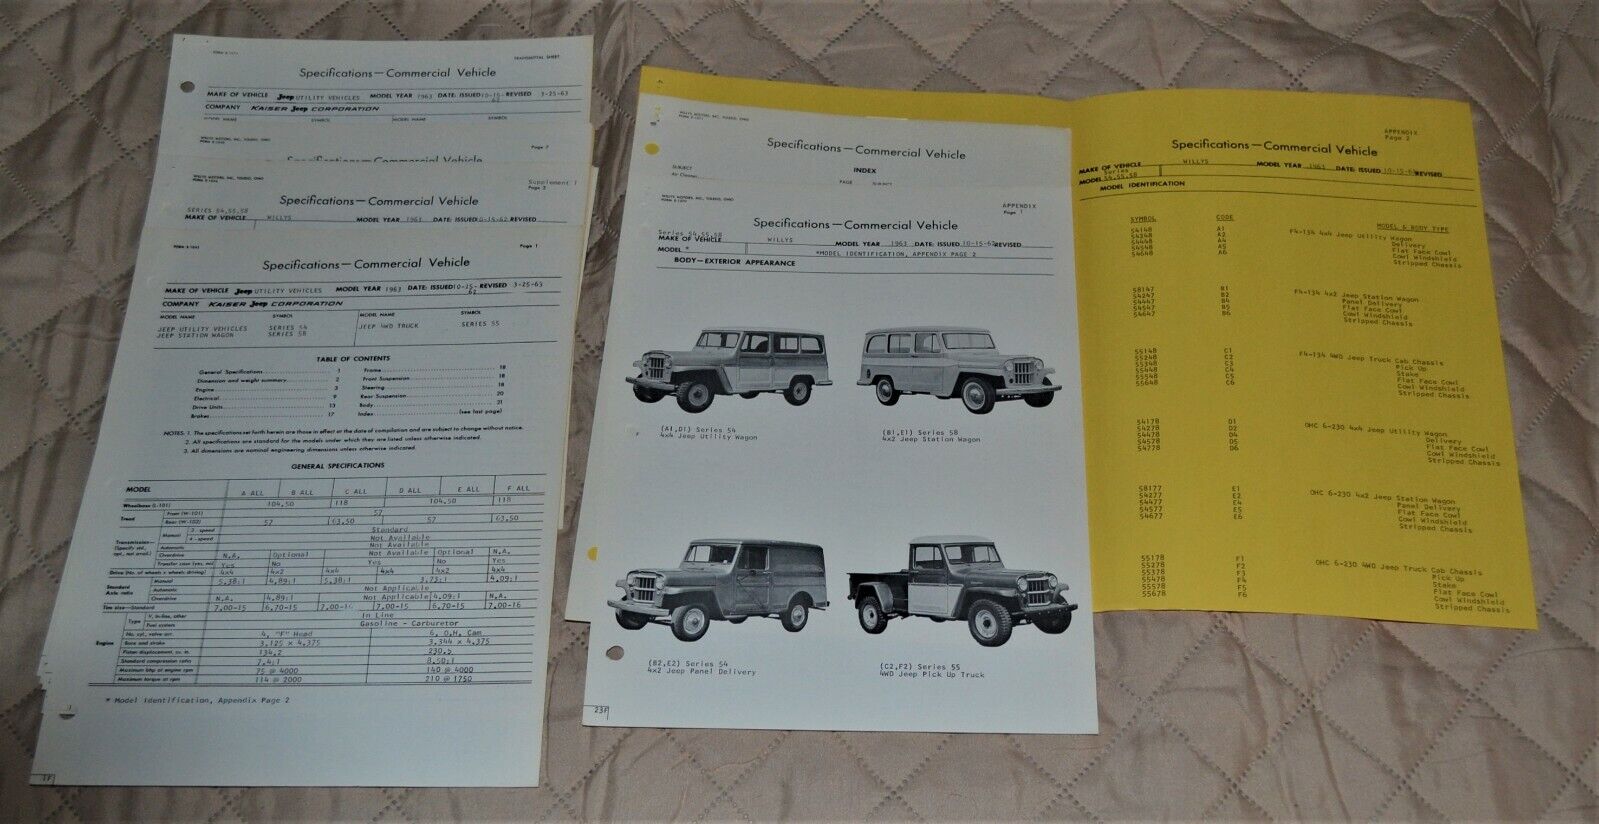 VTG 1963 Kaiser Willys Jeep Utility Vehicles Specs Series 54 55 58 + Appendices